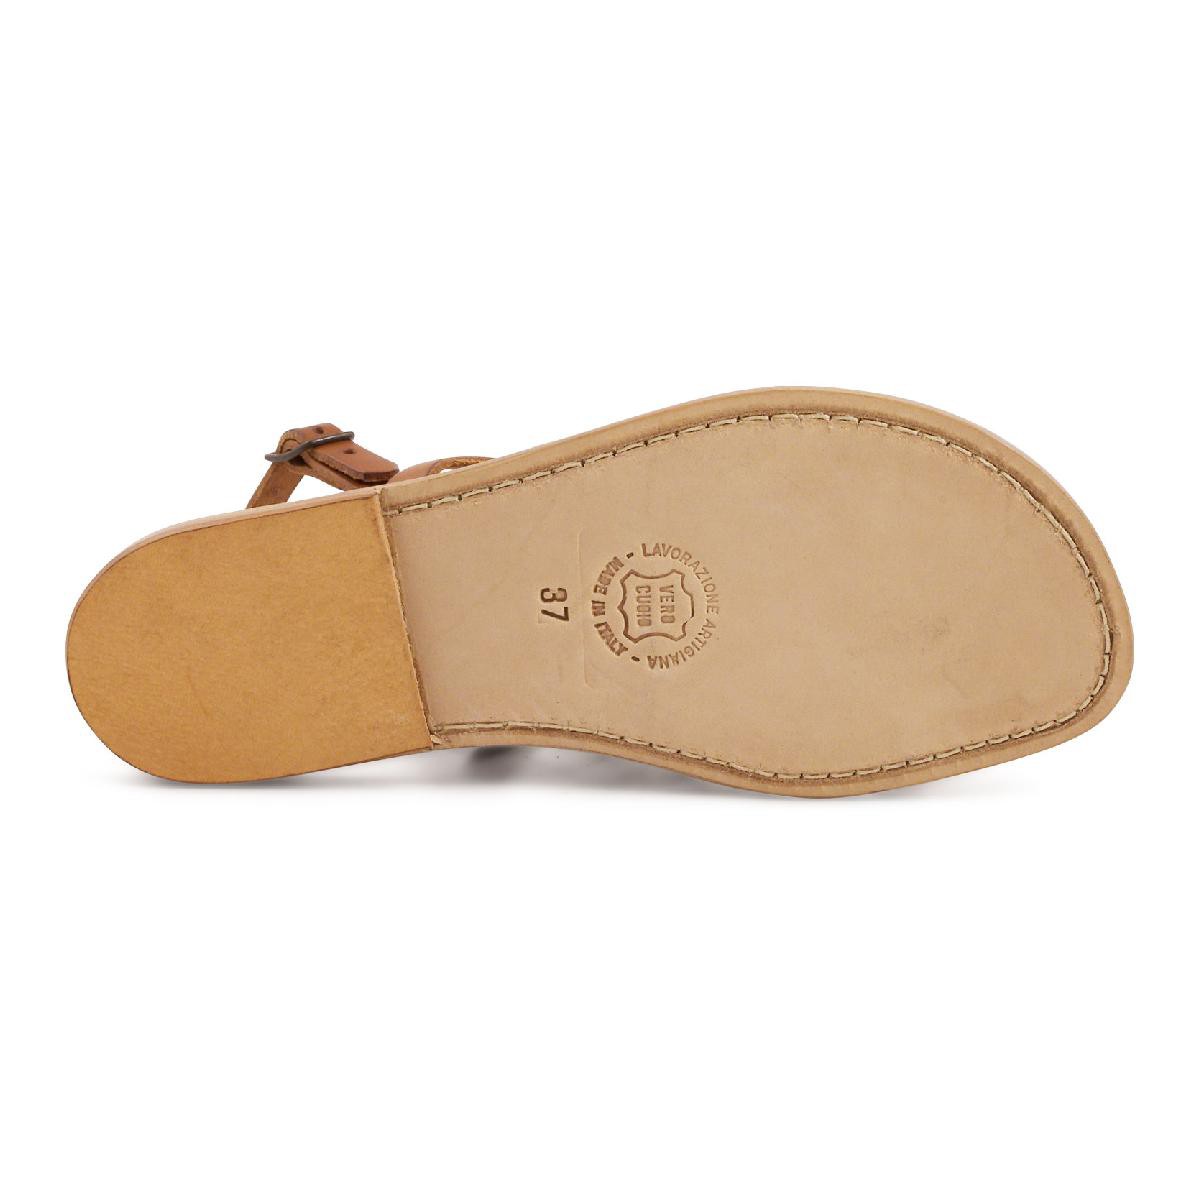 Tan flat sandals in real leather Handmade in Italy | The leather craftsmen